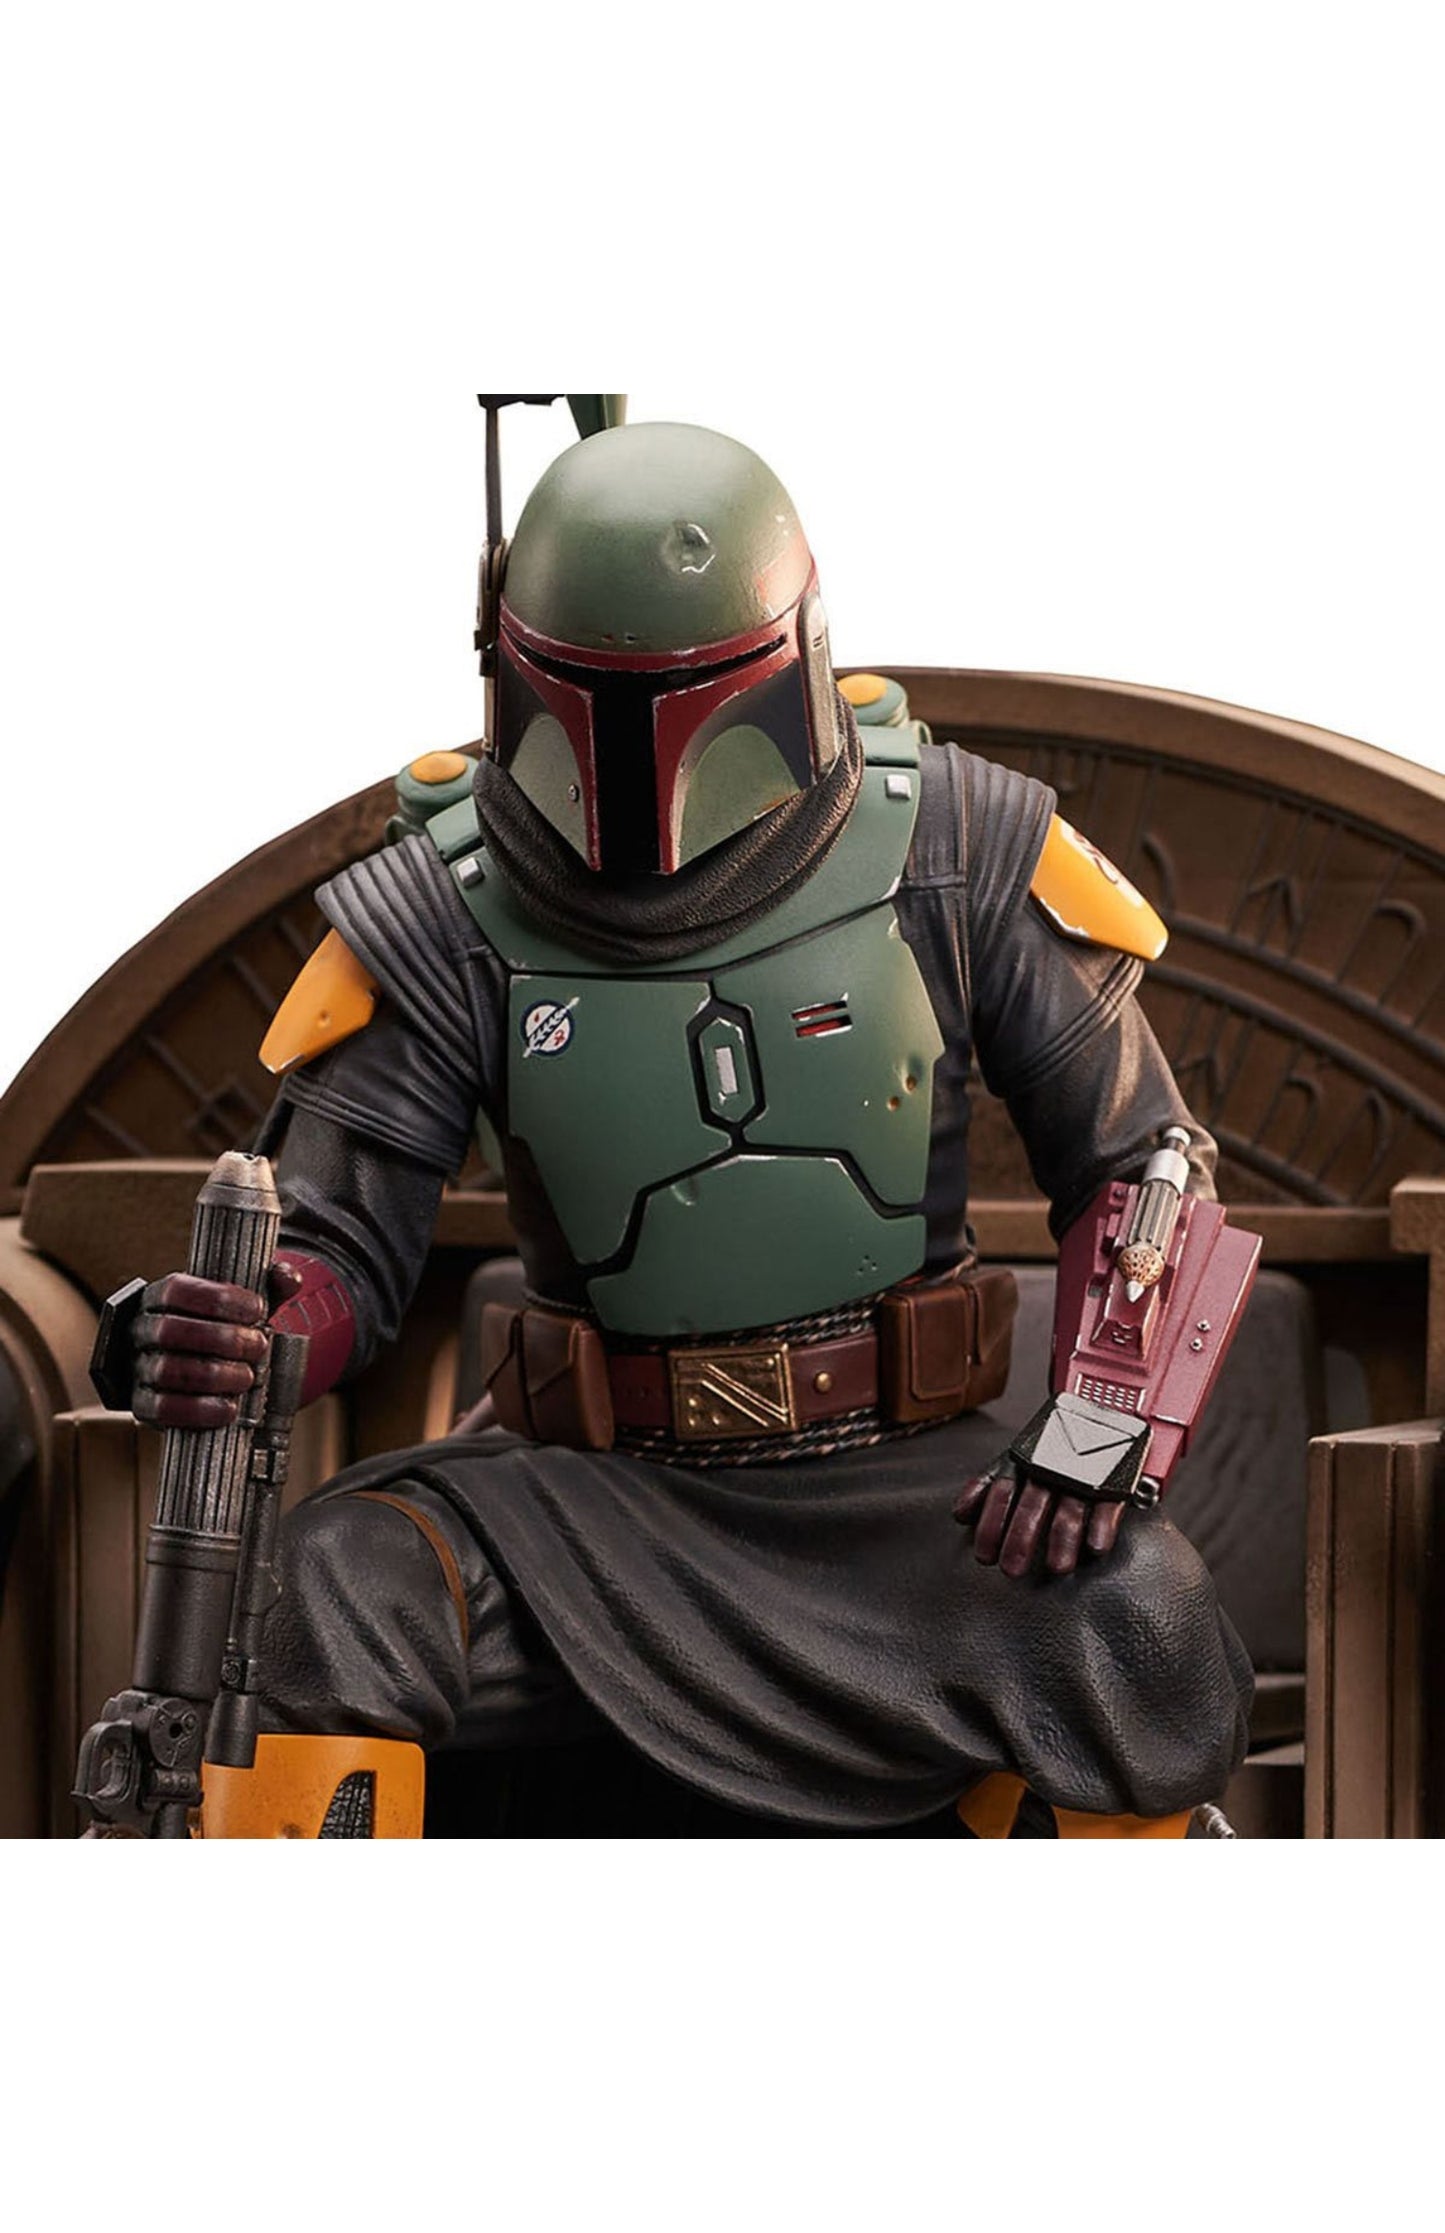 Star Wars The Mandalorian Boba Fett on Throne Premier Collection 1:7 Scale Statue